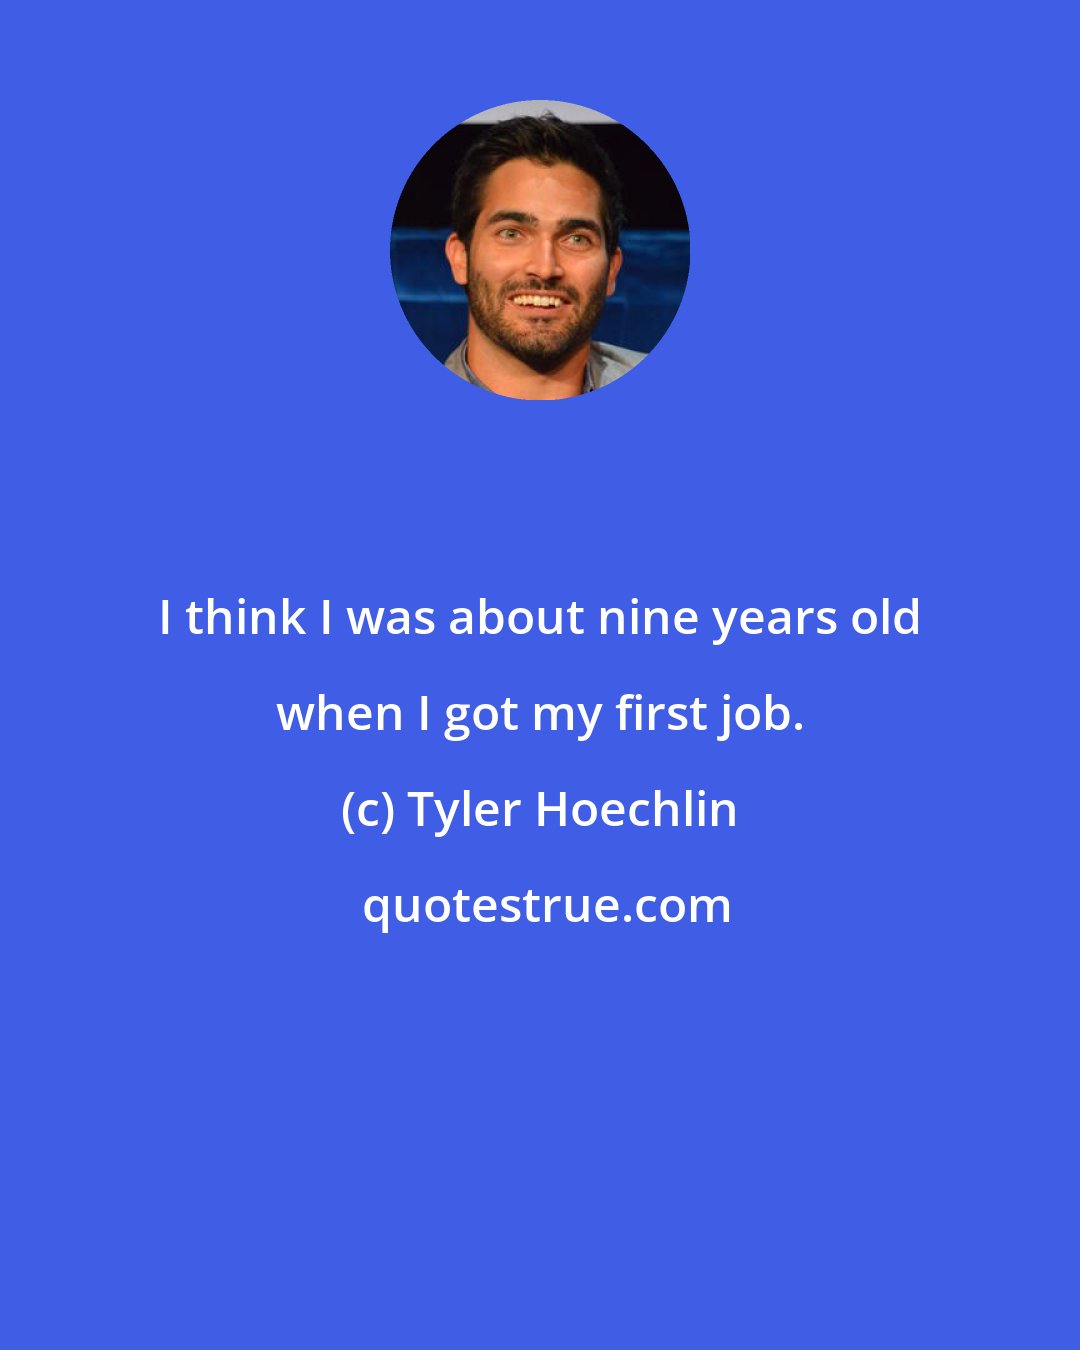 Tyler Hoechlin: I think I was about nine years old when I got my first job.